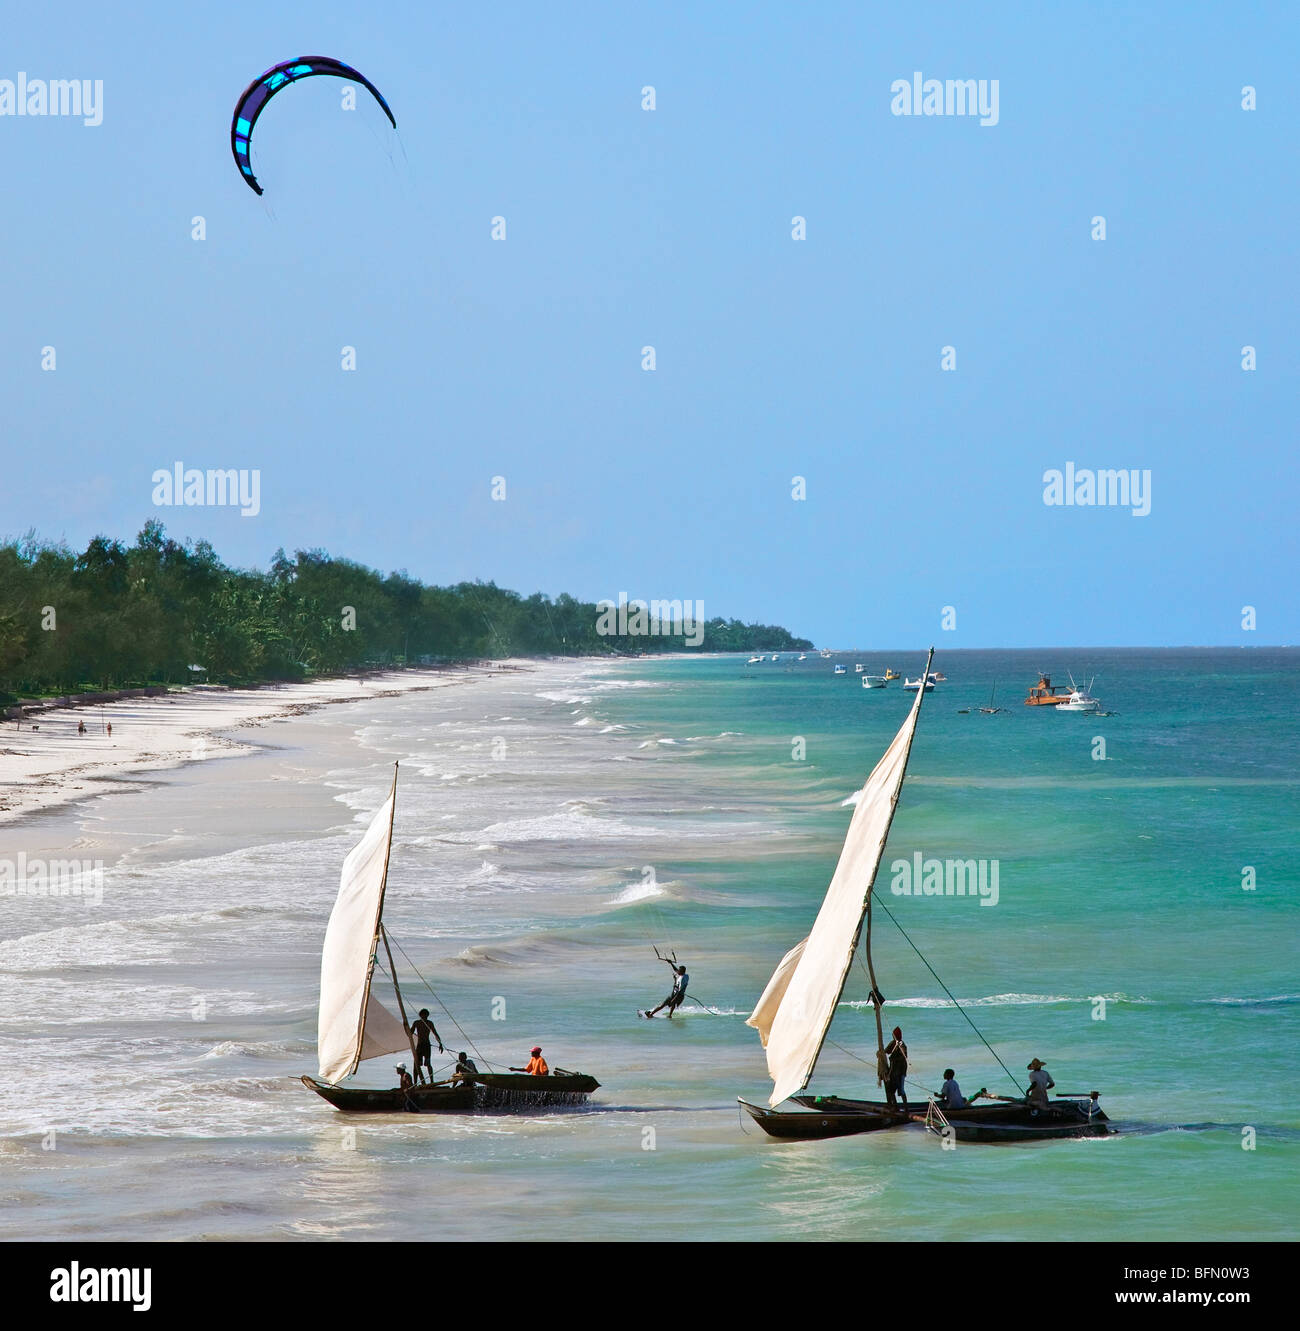 Kenya, Mombasa. A kite surfer and outrigger canoes beach at Diani Beach, a popular tourist destination on Kenya s south coast. Stock Photo